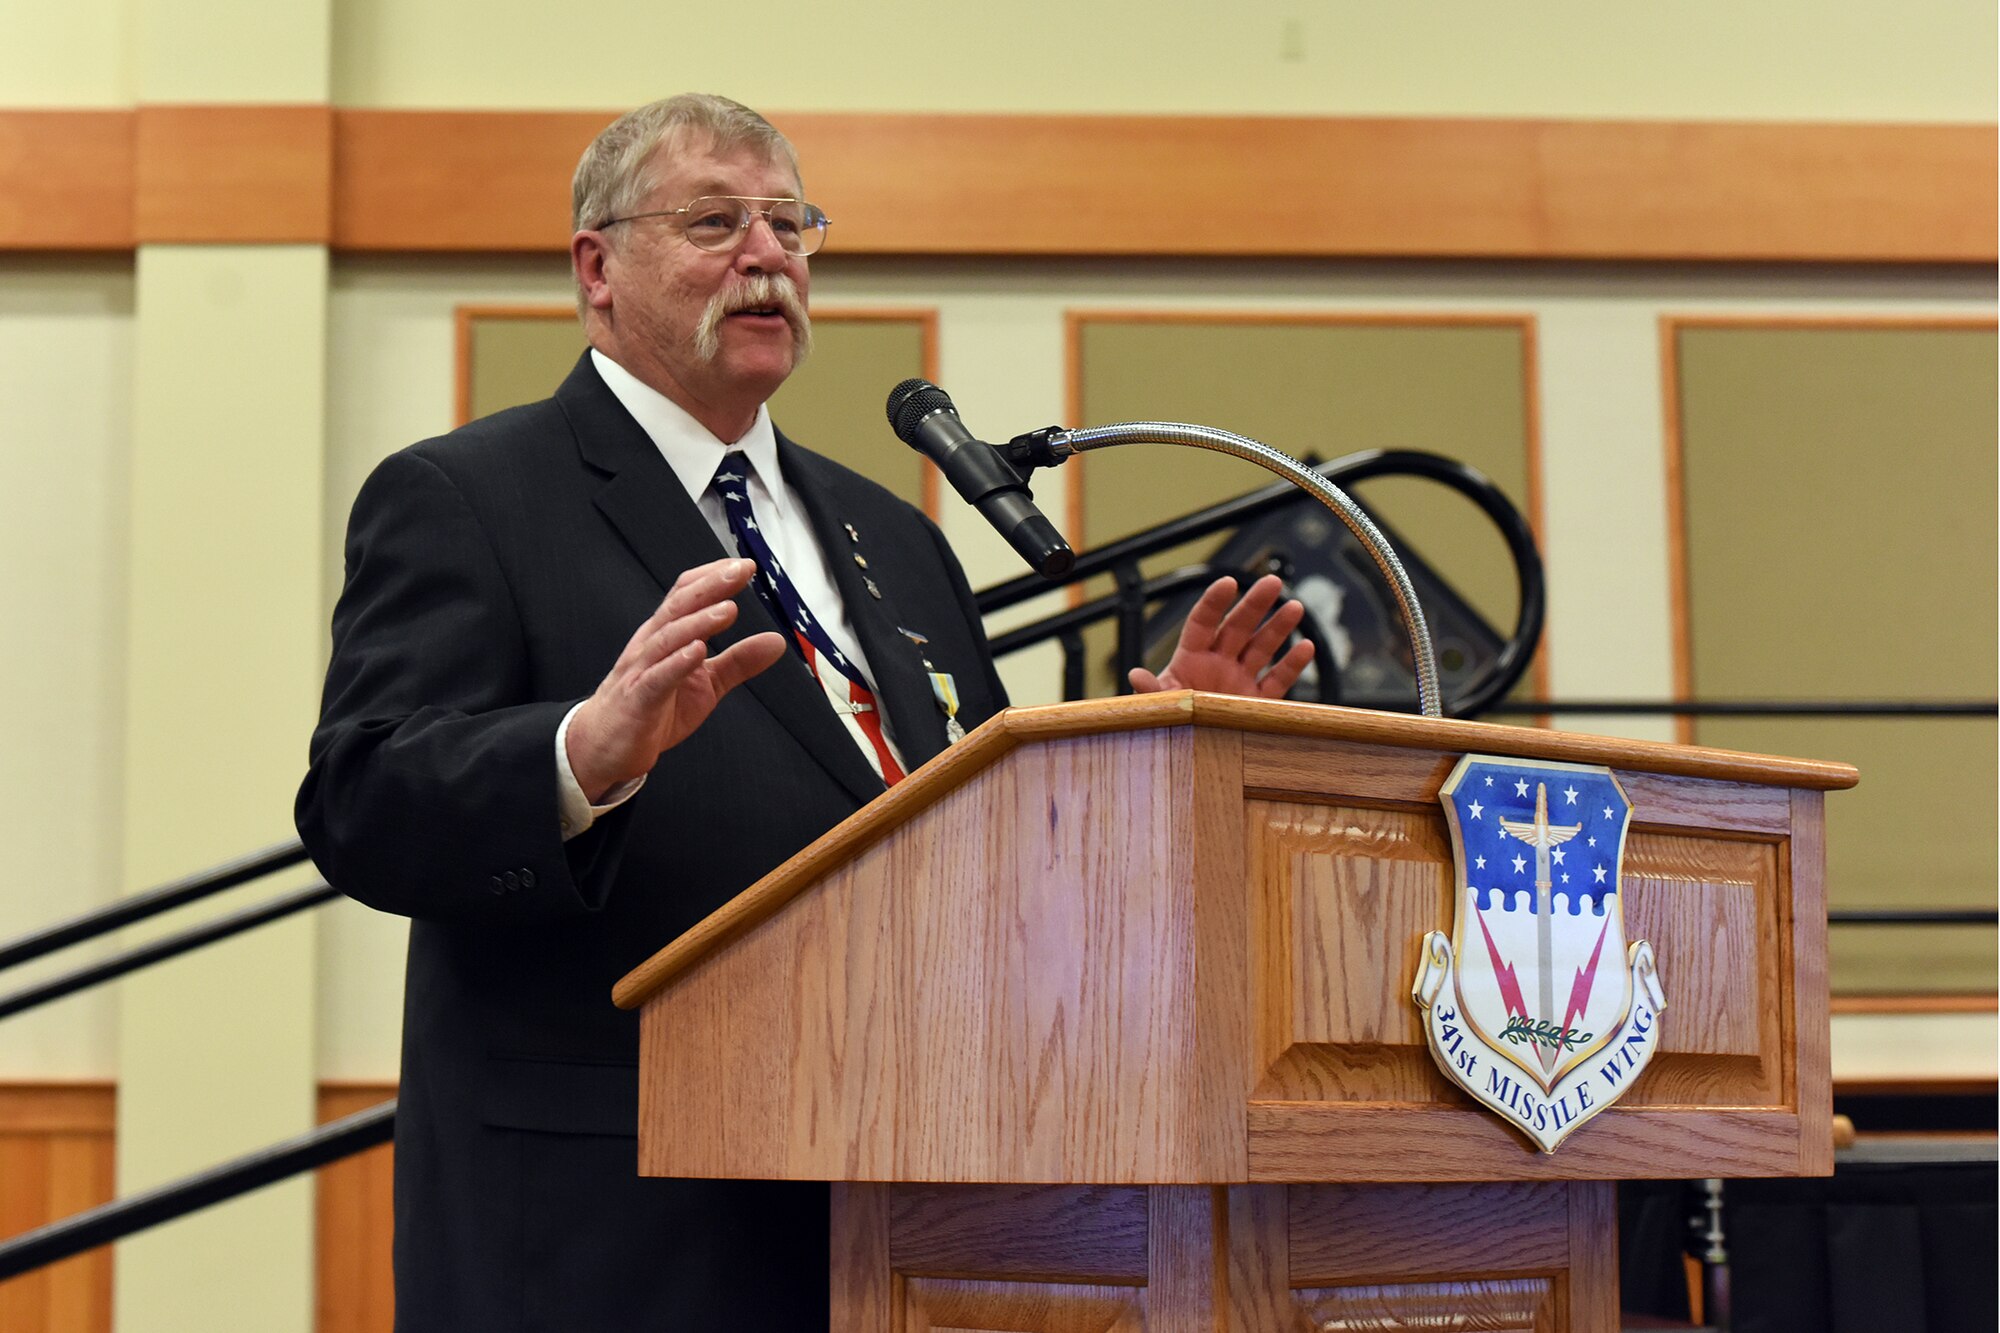 180228-F-UQ541-0673 Peter Woelkers Sr., 341st Missile Wing Weapons Safety Office chief of weapons safety/nuclear surety officer, offers remarks to attendees at his retirement ceremony, Feb. 28, 2018, at Malmstrom Air Force Base, Mont. Woelkers said goodbye to Malmstrom after a 20-year civilian career. (U.S. Air Force photo by Kiersten McCutchan)